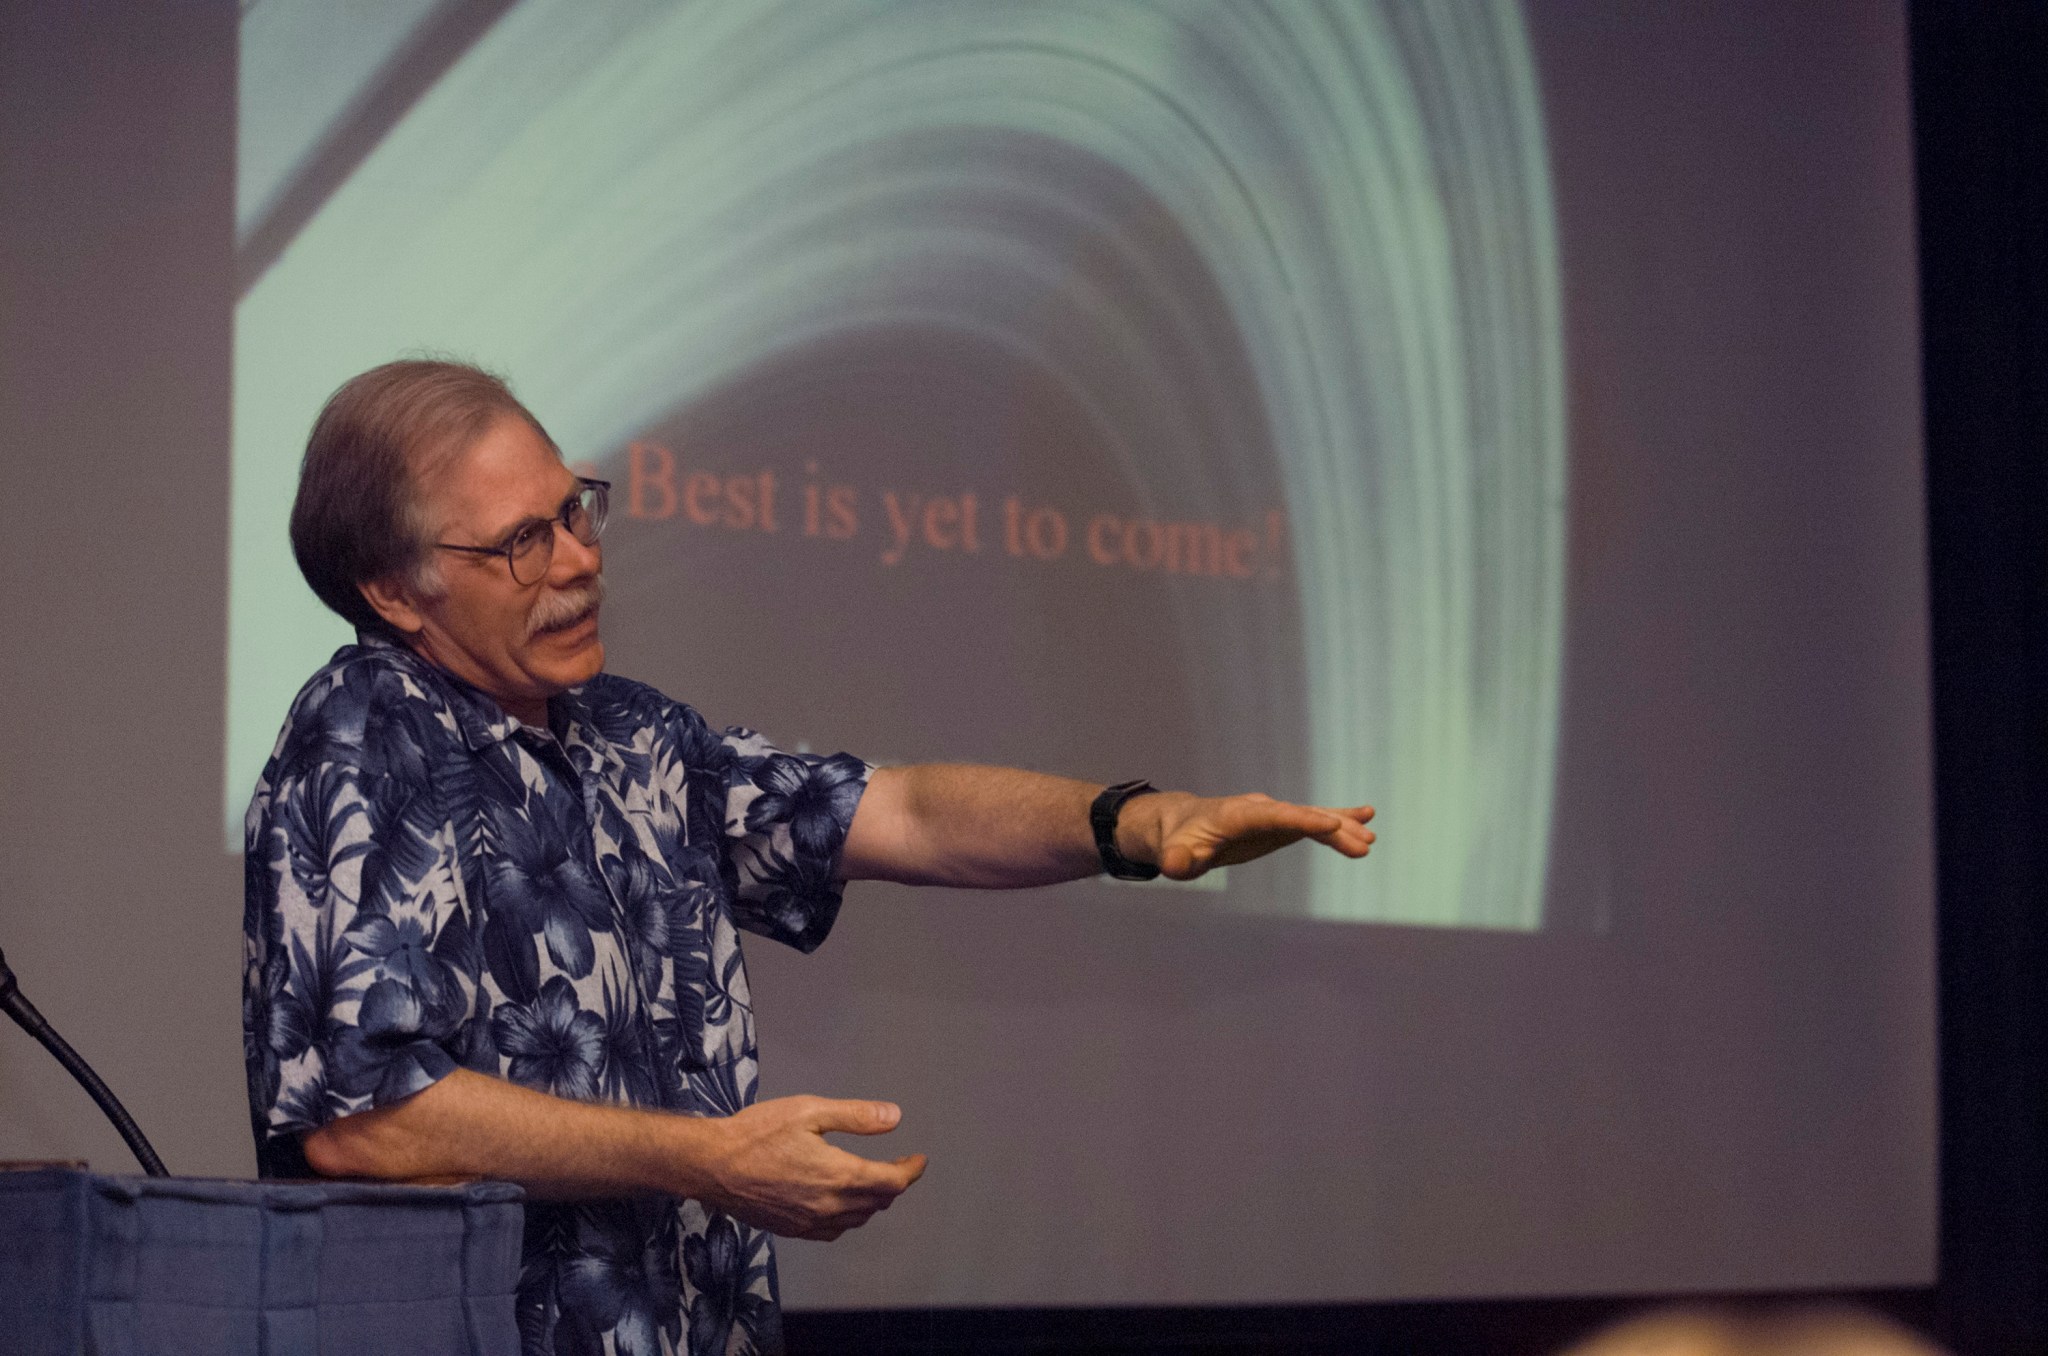 Jeff Cuzzi giving a talk on the rings of Saturn. “The best is yet to come!”